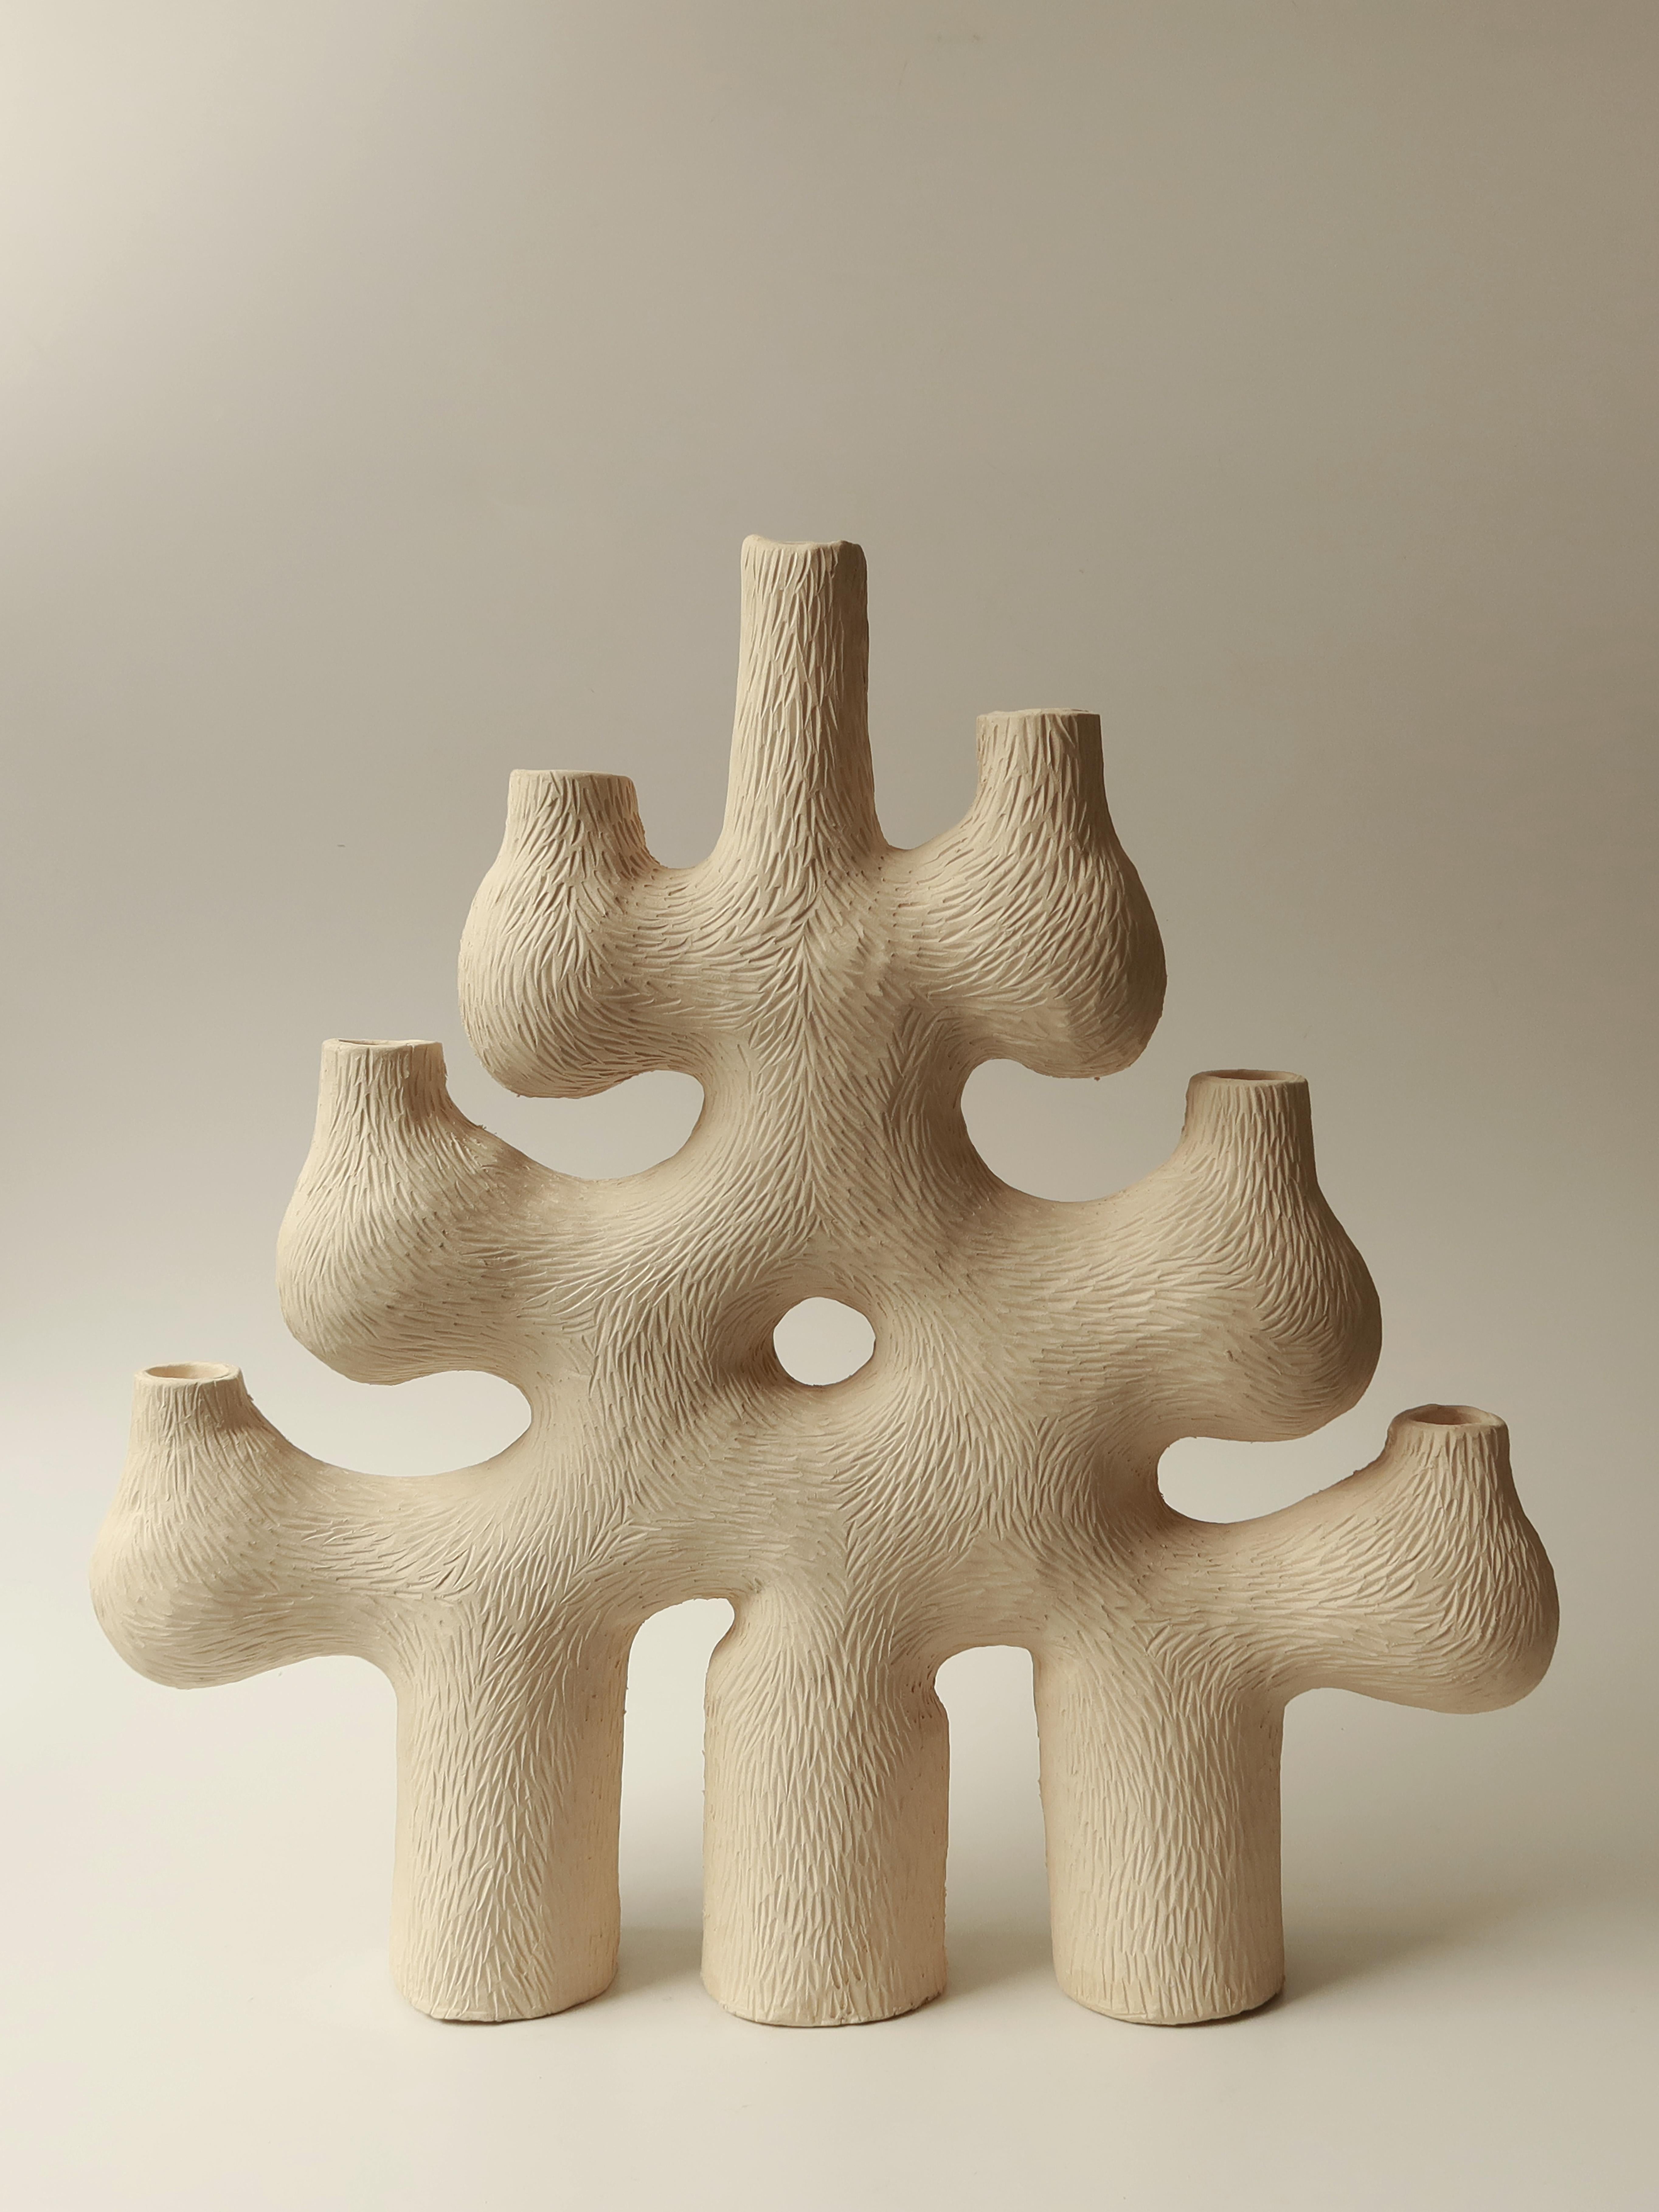 Forest Candelabra no.5 by Jan Ernst
Dimensions: W 55 x D 12 x H 52 cm
Materials: White stoneware, Black clay, Terracotta

Glazed to client specification.


Jan Ernst’s work takes on an experimental approach, as he prefers making bespoke